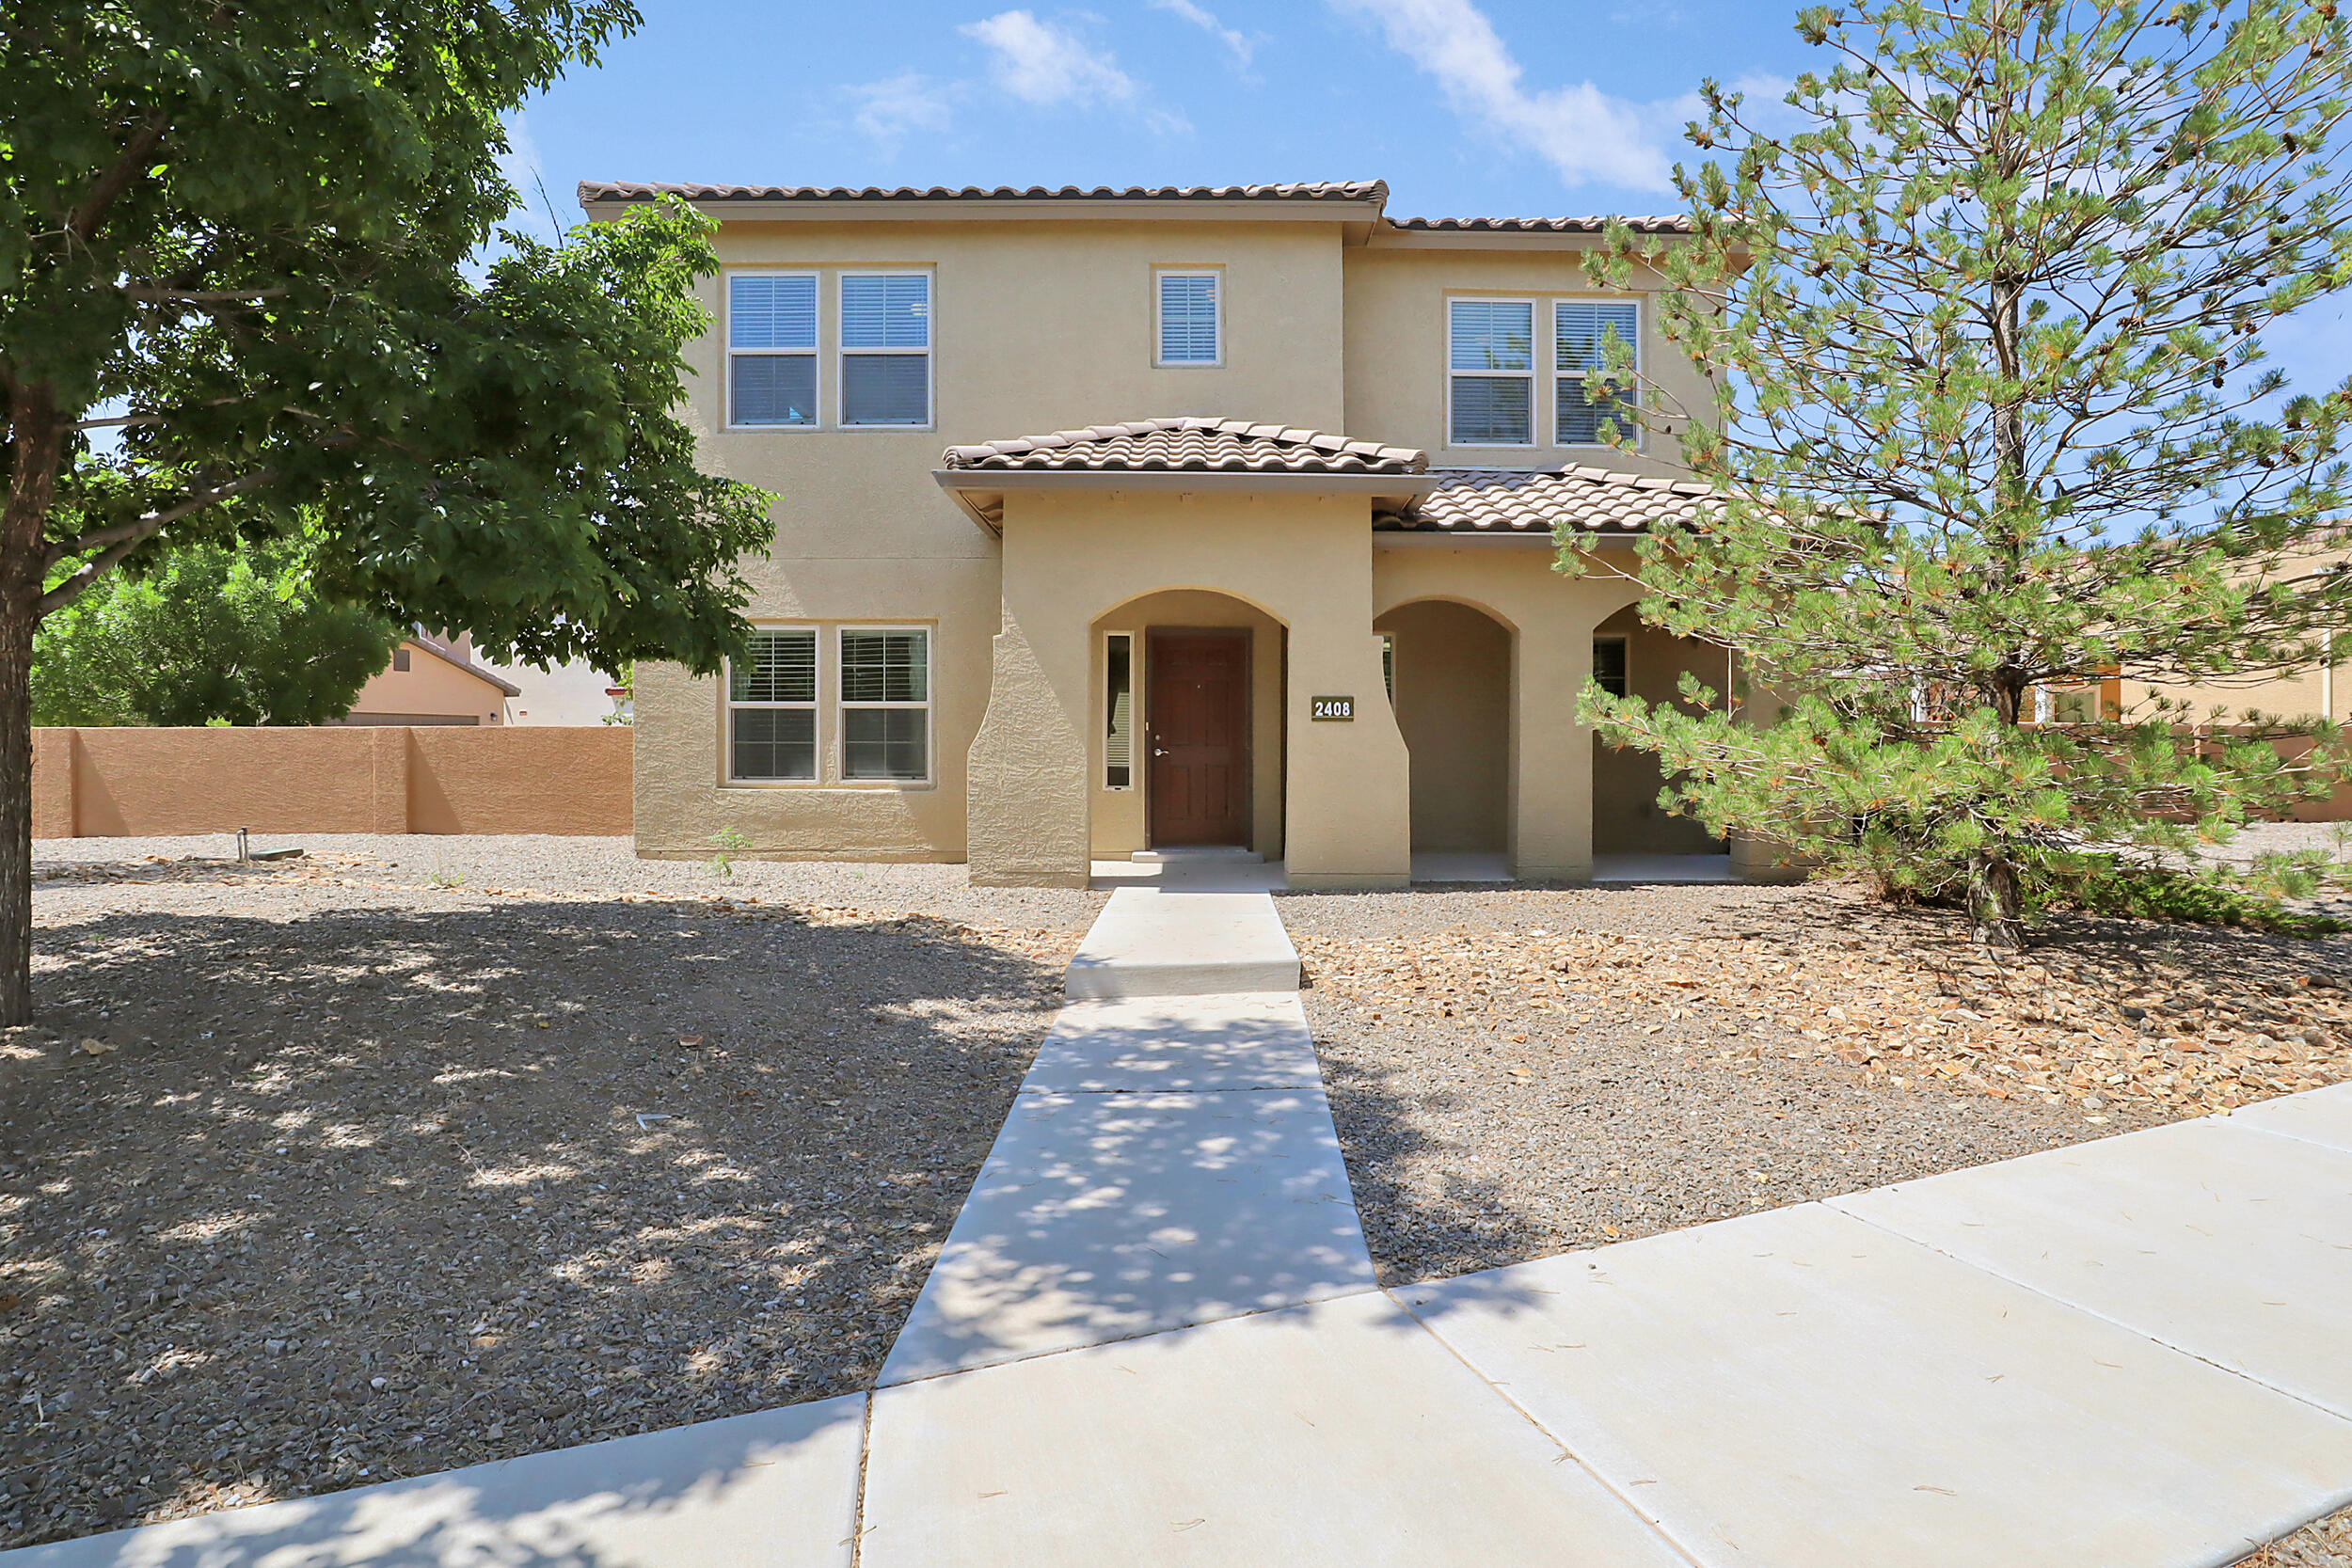 Don't miss out on this amazing Mesa del Sol home, right around the corner from the park and pool, offering an incredibly versatile floorplan, A wide foyer and a large office/flex room welcomes you as you enter. The office could easily have doors added for more privacy. A few more steps and you're in the wide open greatroom featuring a large kitchen with granite counters, tons of cabinet space and a pantry. Lots of space for dining and living room overlooking the spacious backyard with a wall of windows. Upstairs you'll find all three bedrooms and a loft, which could easily be turned into a fourth bedroom. The private yard has lots of space for gardening, play equipment, dog run and more. Whatever you need you'll be able to fit it on this large corner lot.